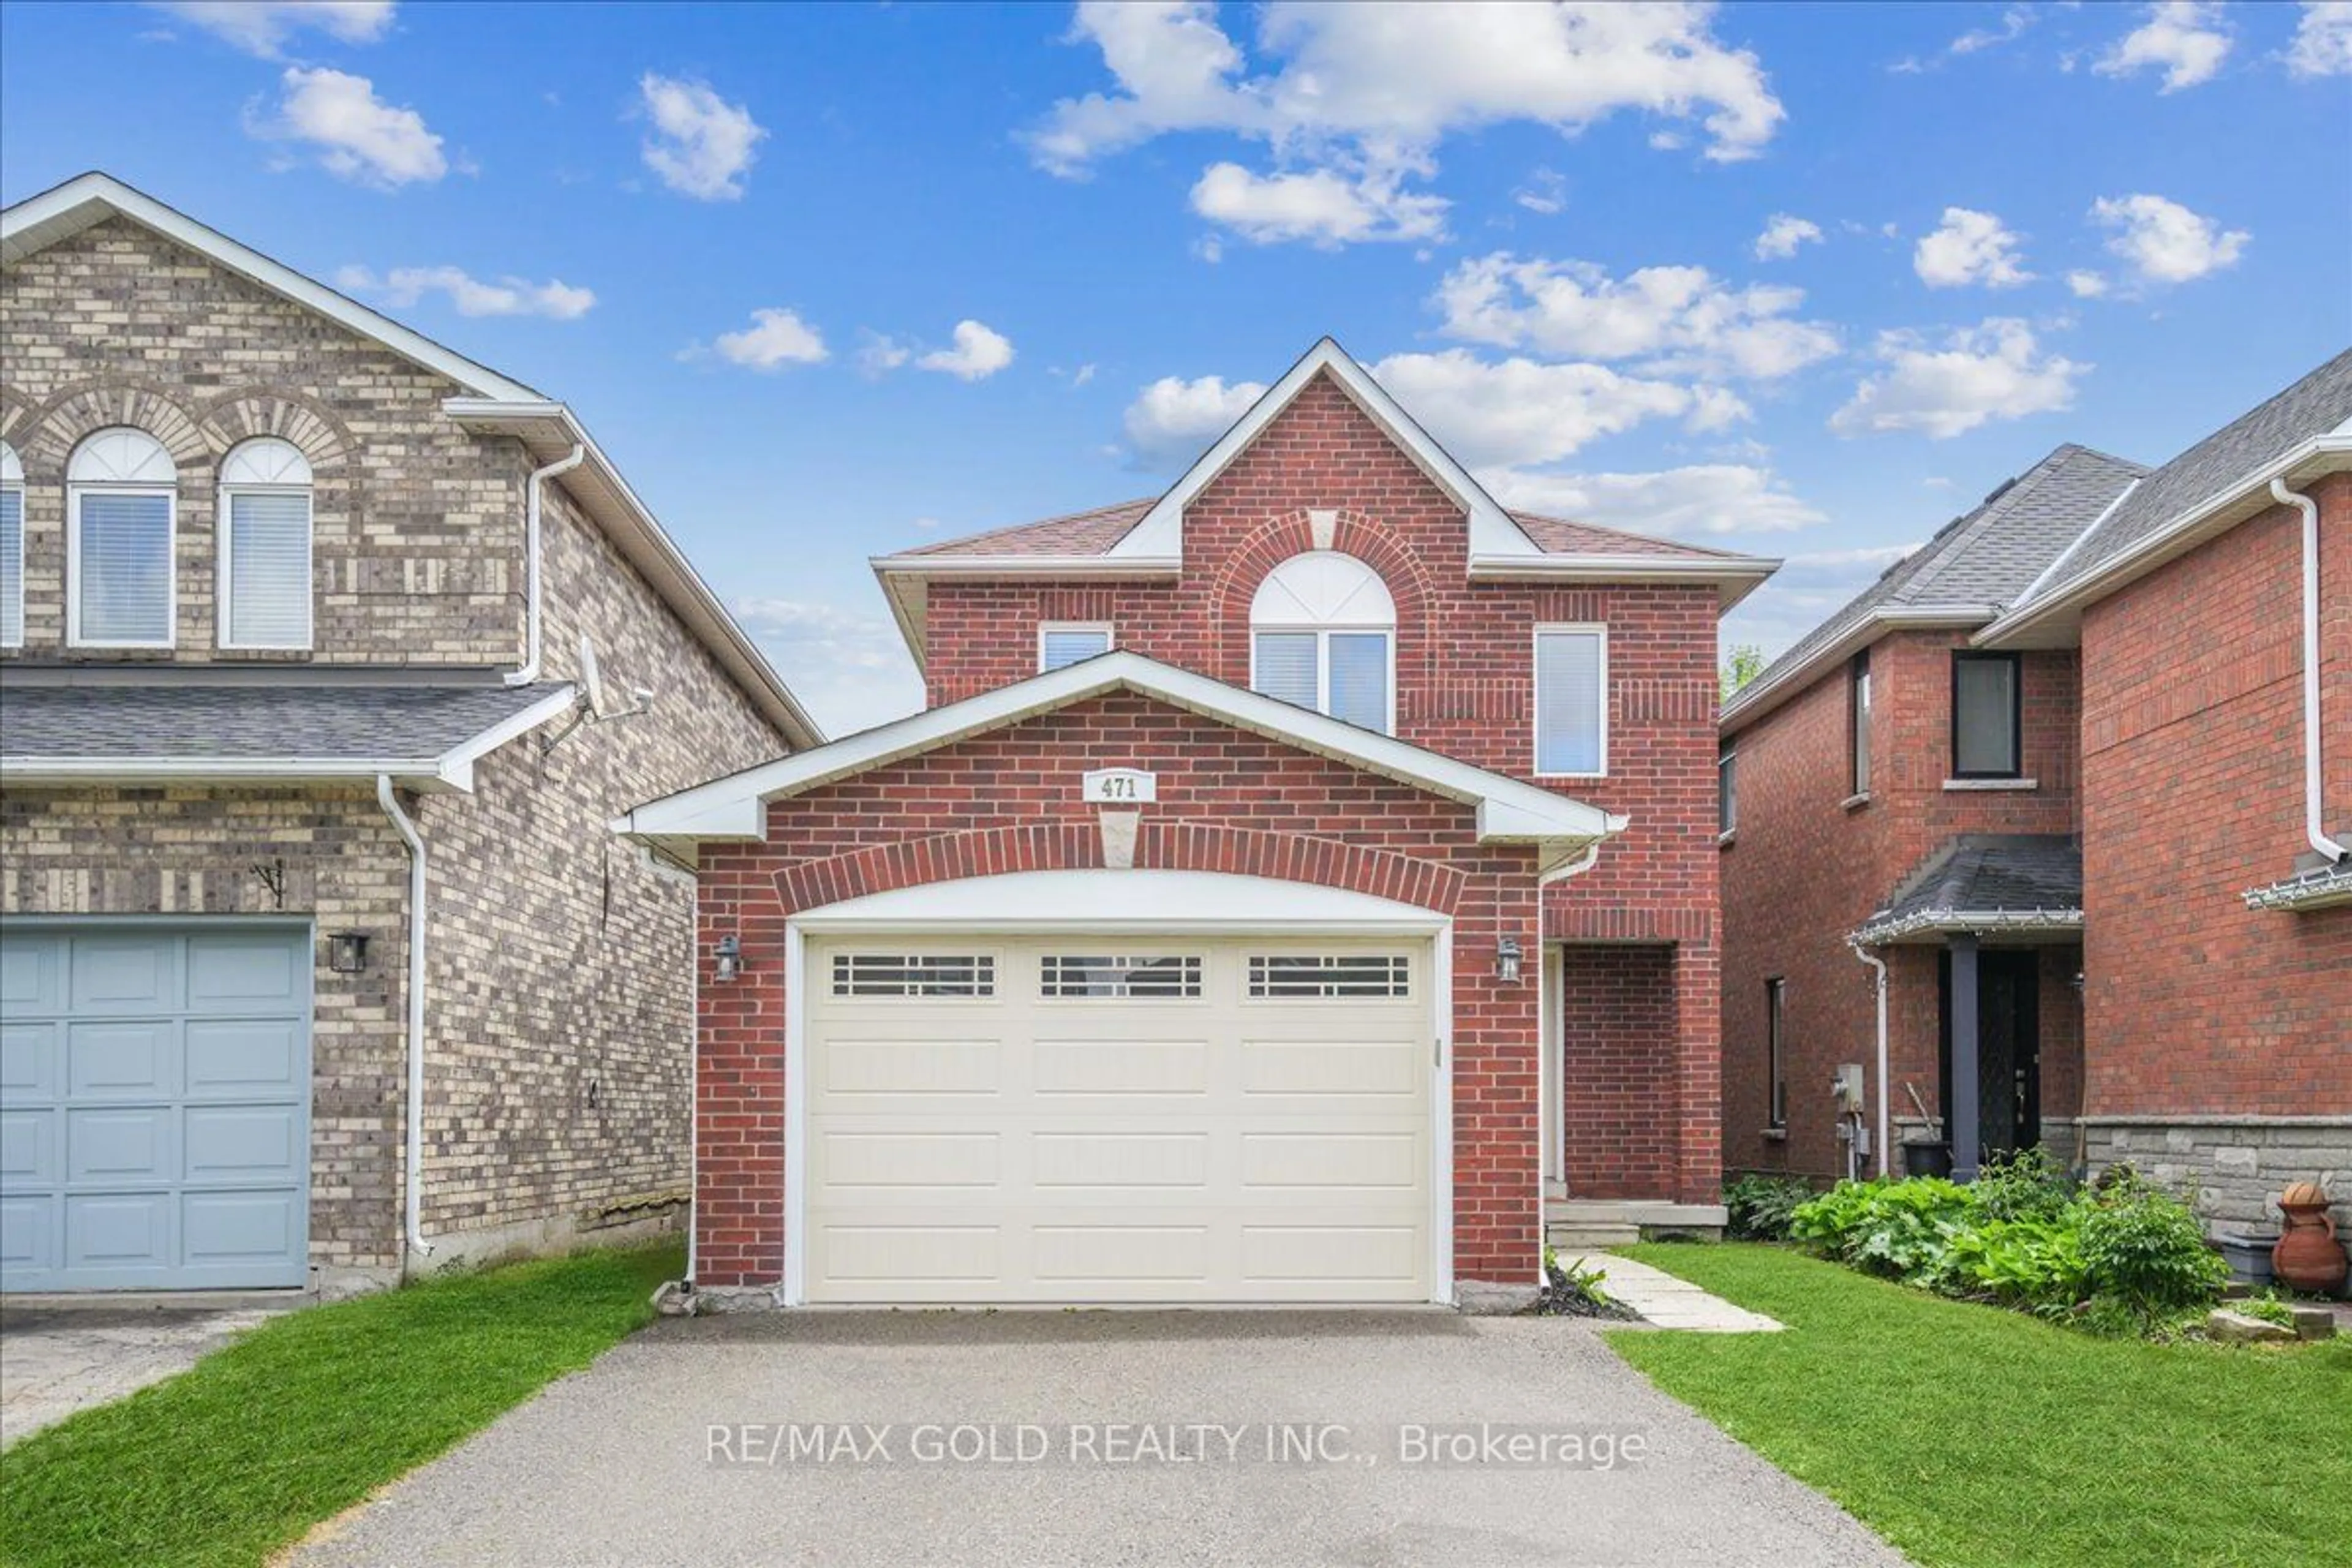 Home with brick exterior material for 471 Jay Cres, Orangeville Ontario L9W 4Y8